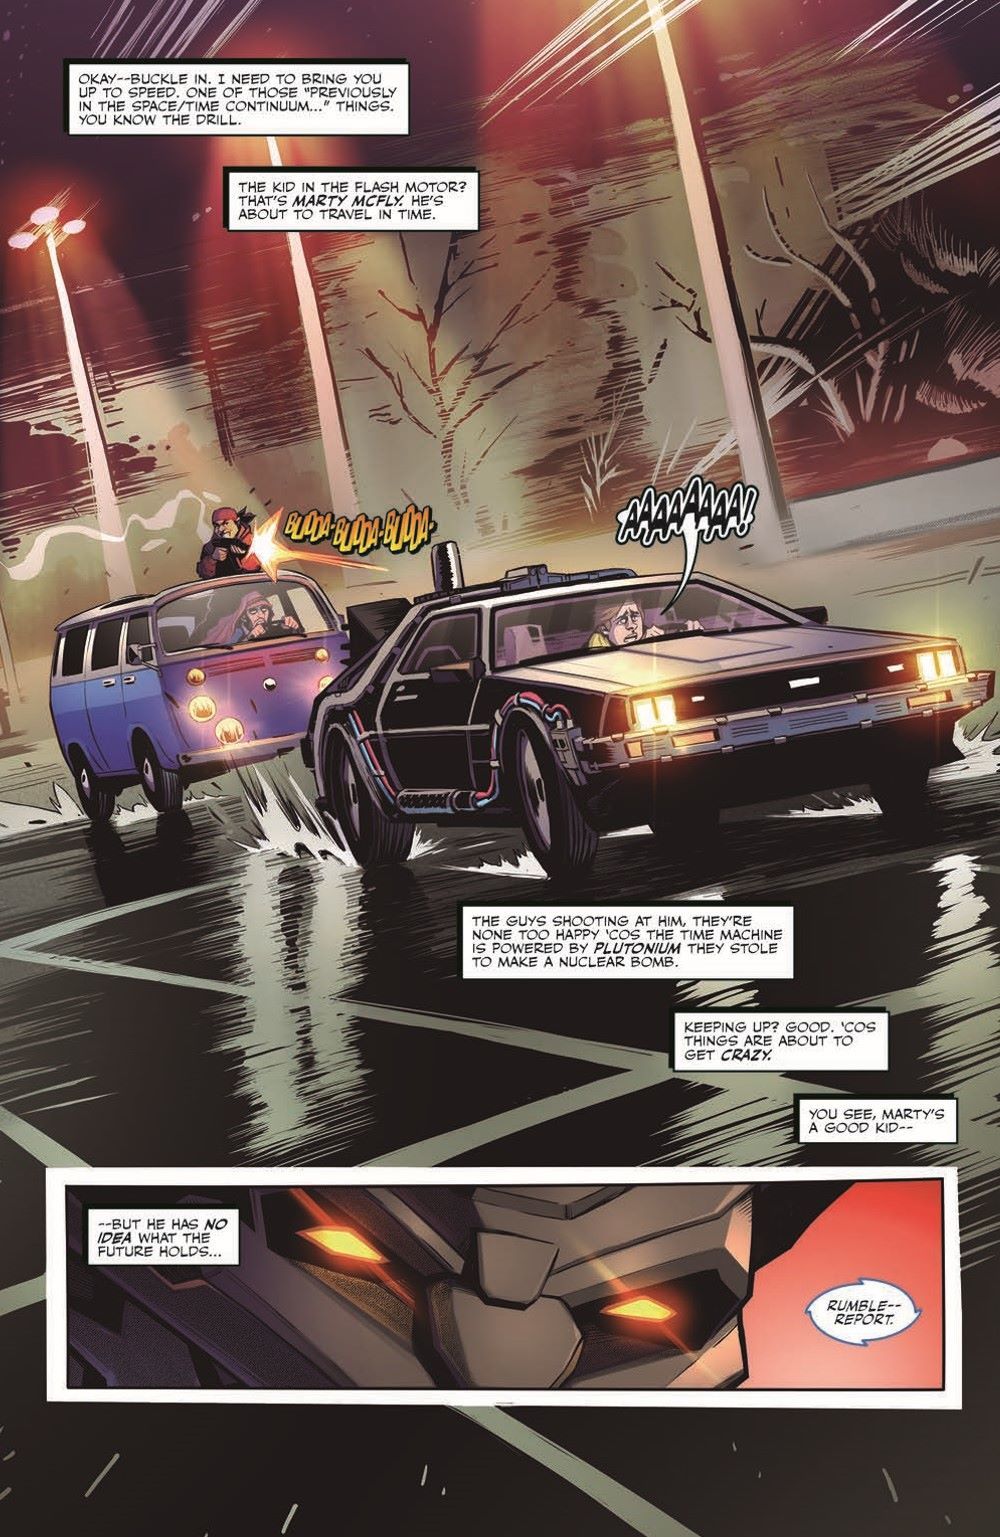 Transformers Back To The Future #1